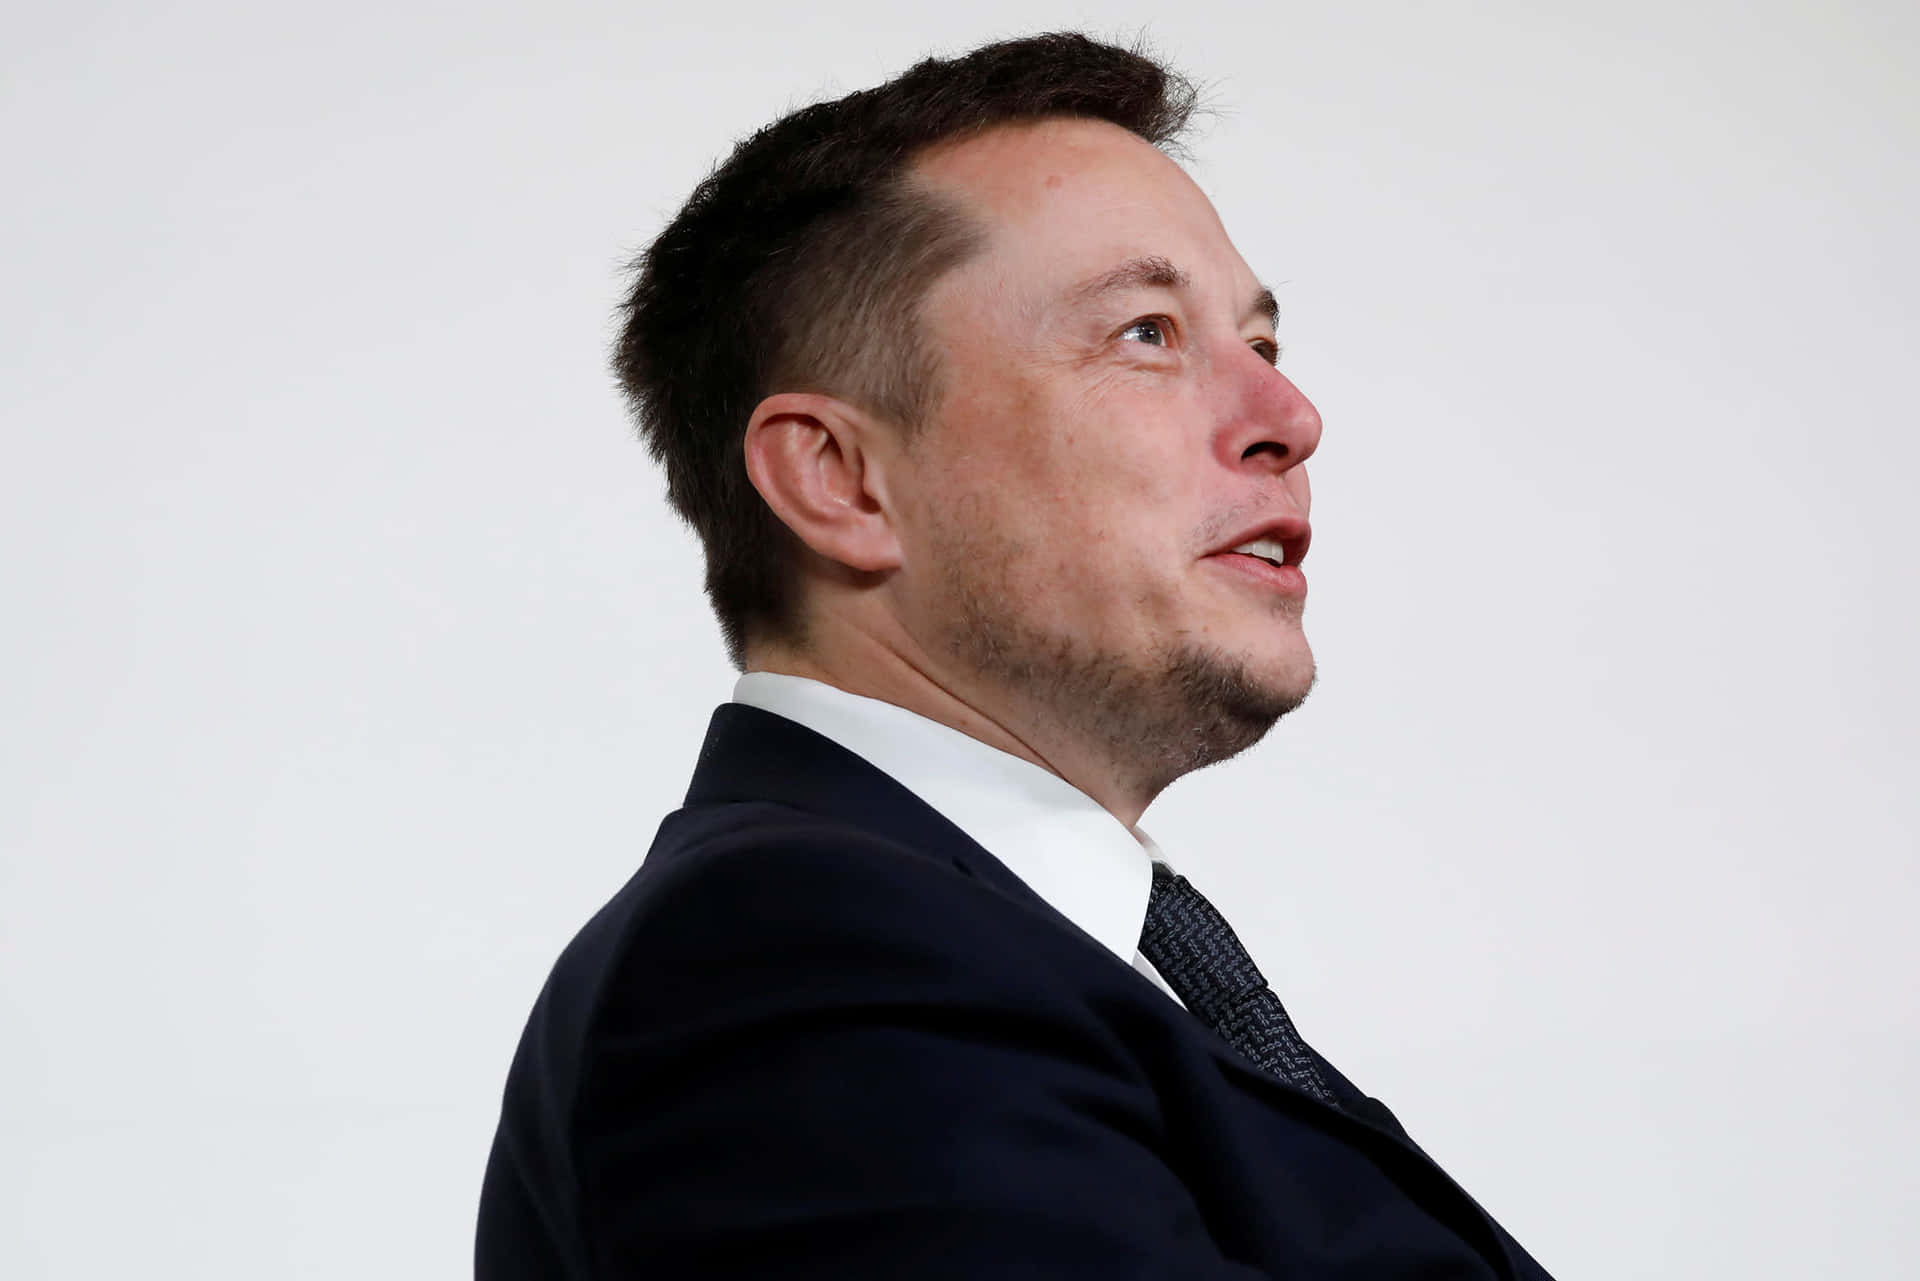 Elon Musk In A Suit And Tie